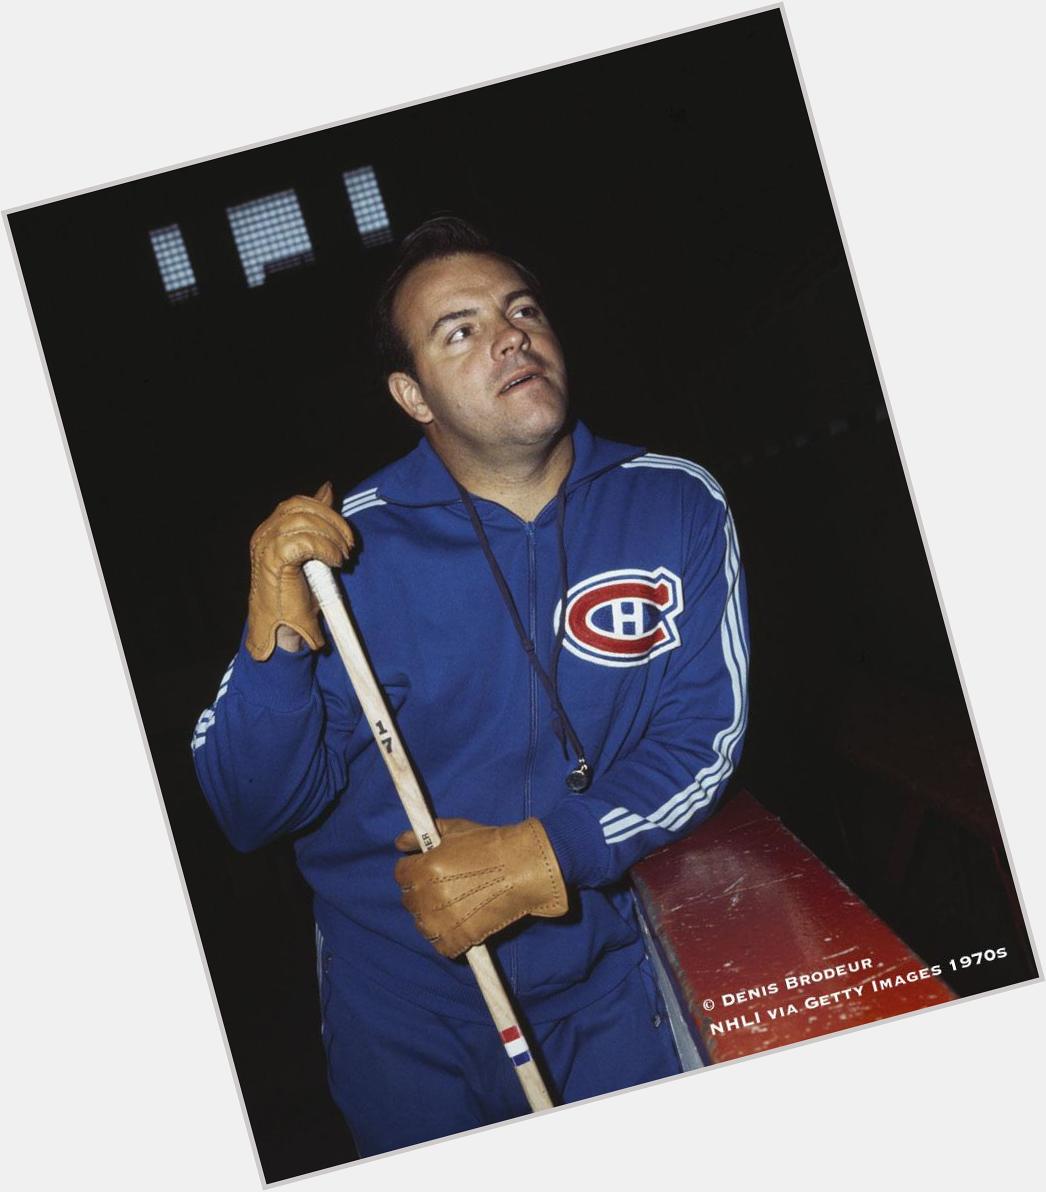 A happy 82nd birthday to legendary coach Scotty Bowman today at his 45th NHL training camp 